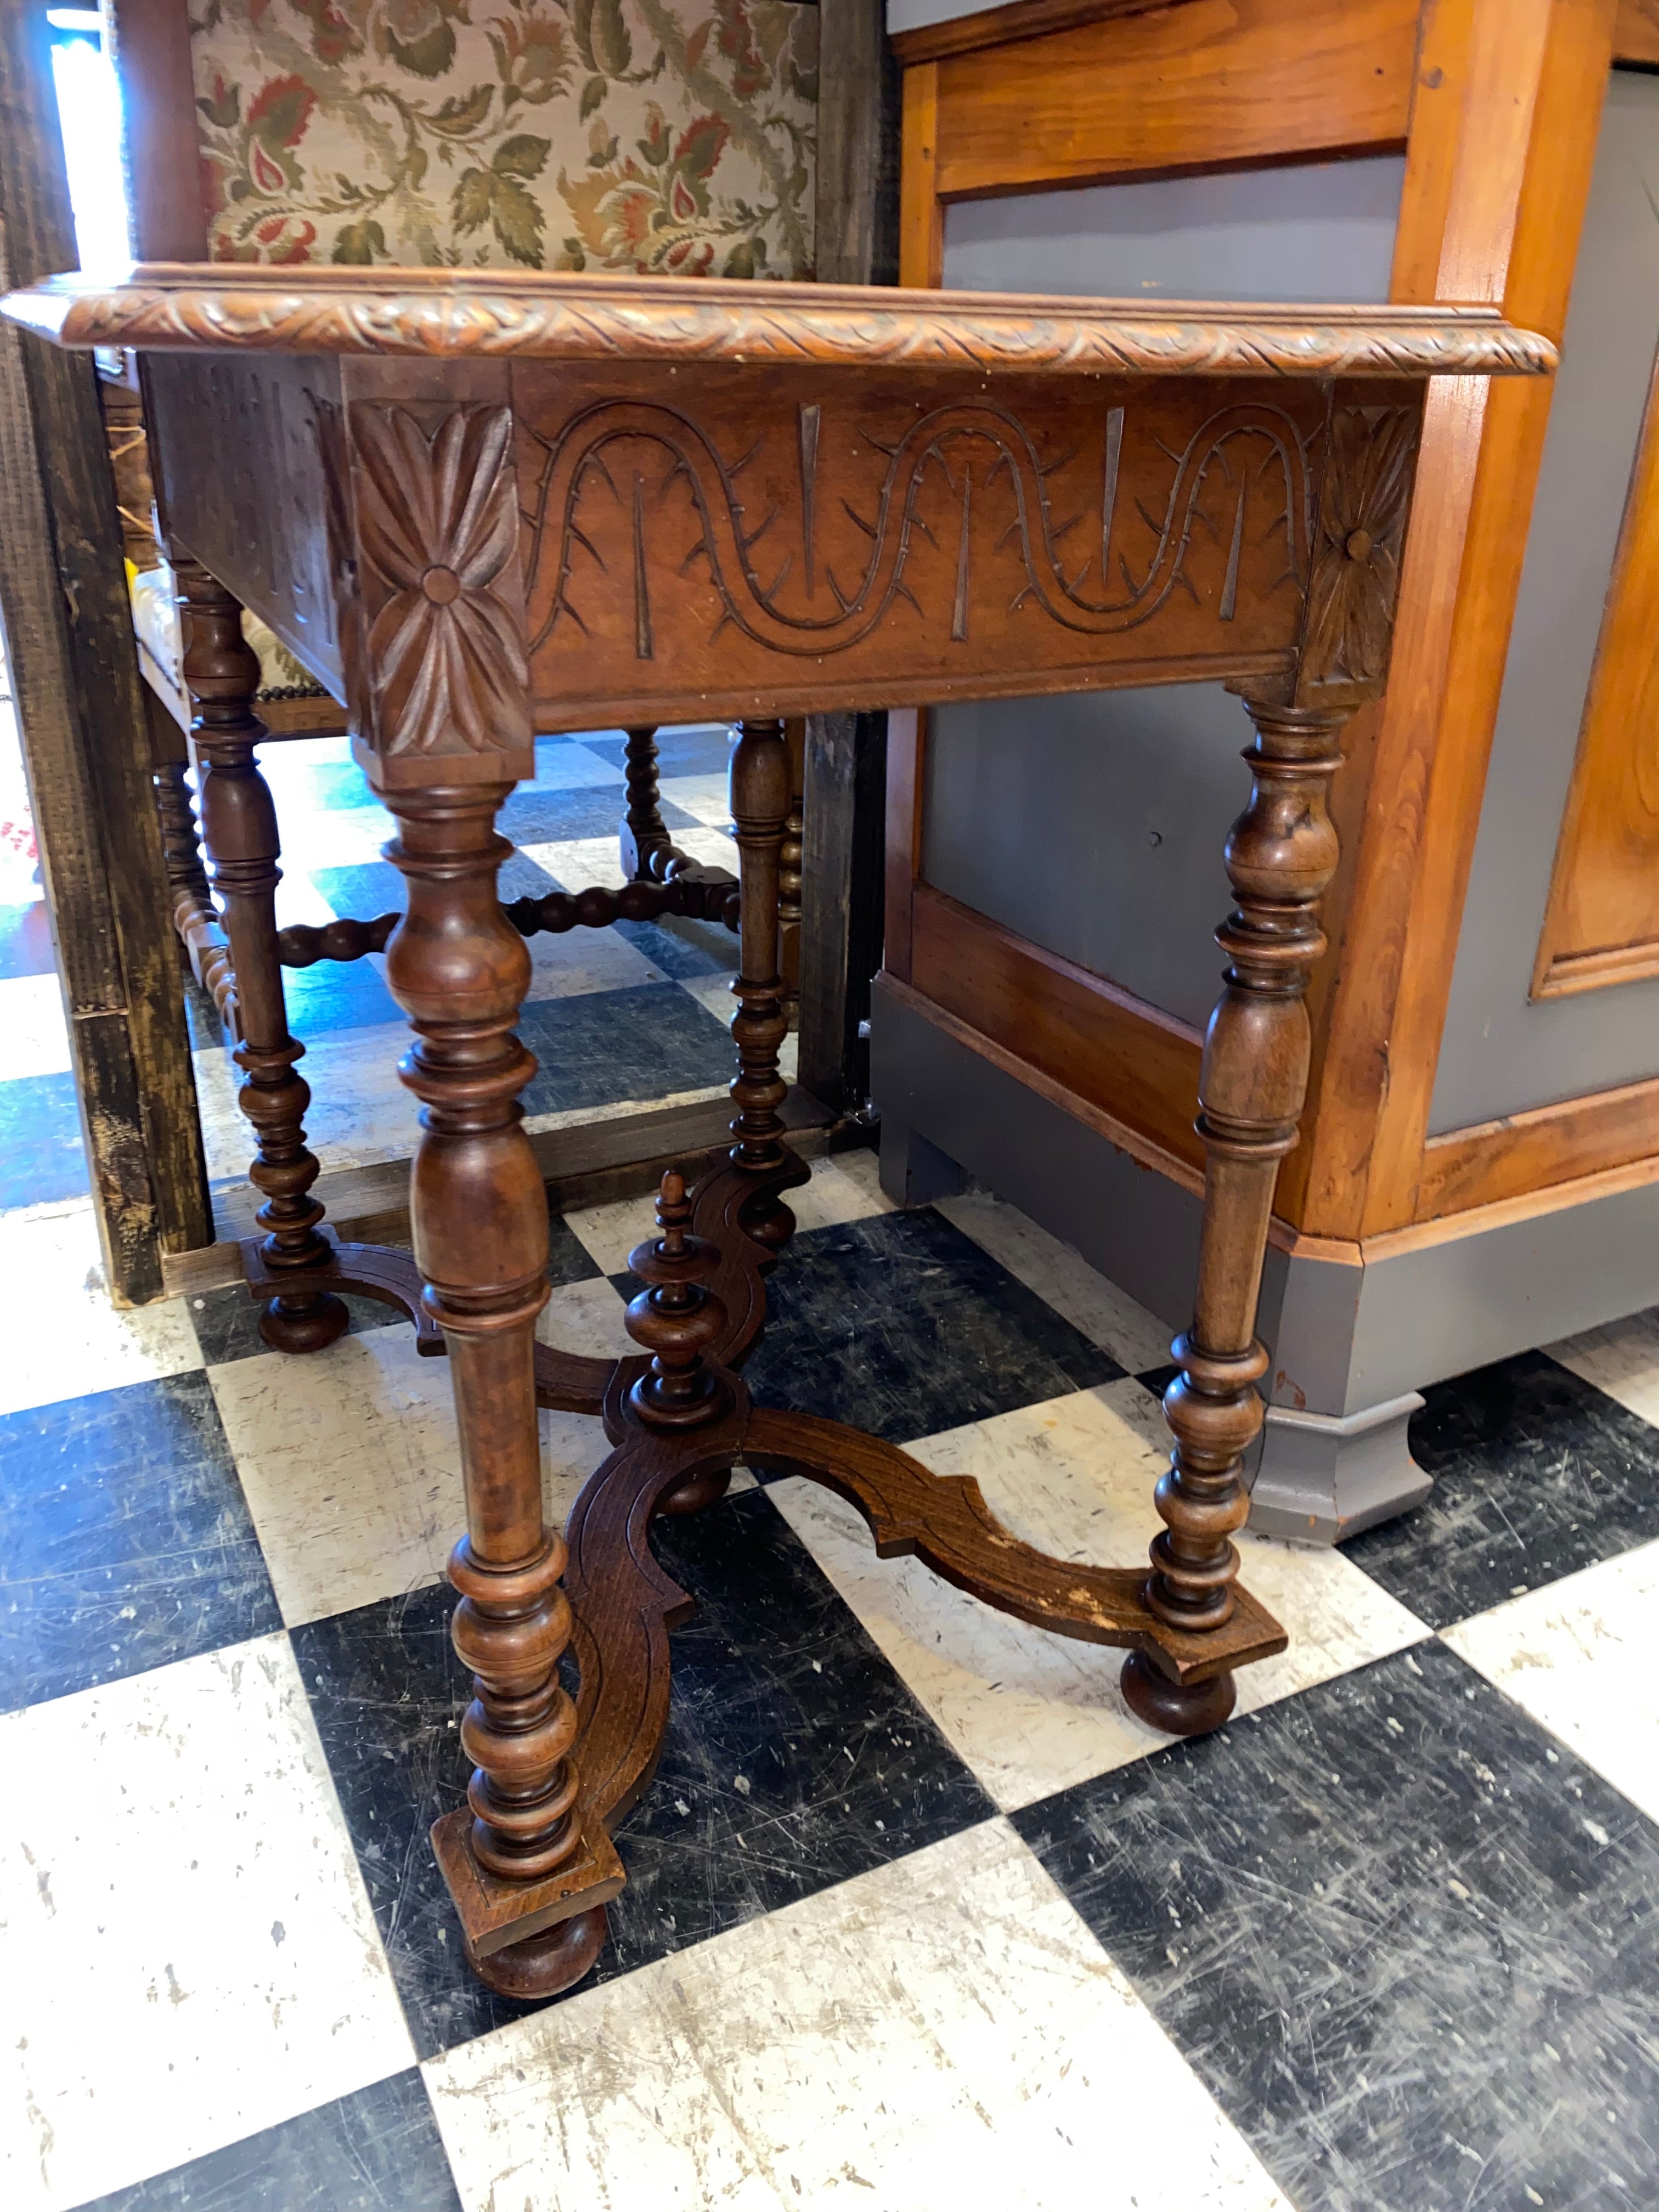 Leather Top End Table from England C. 1930s